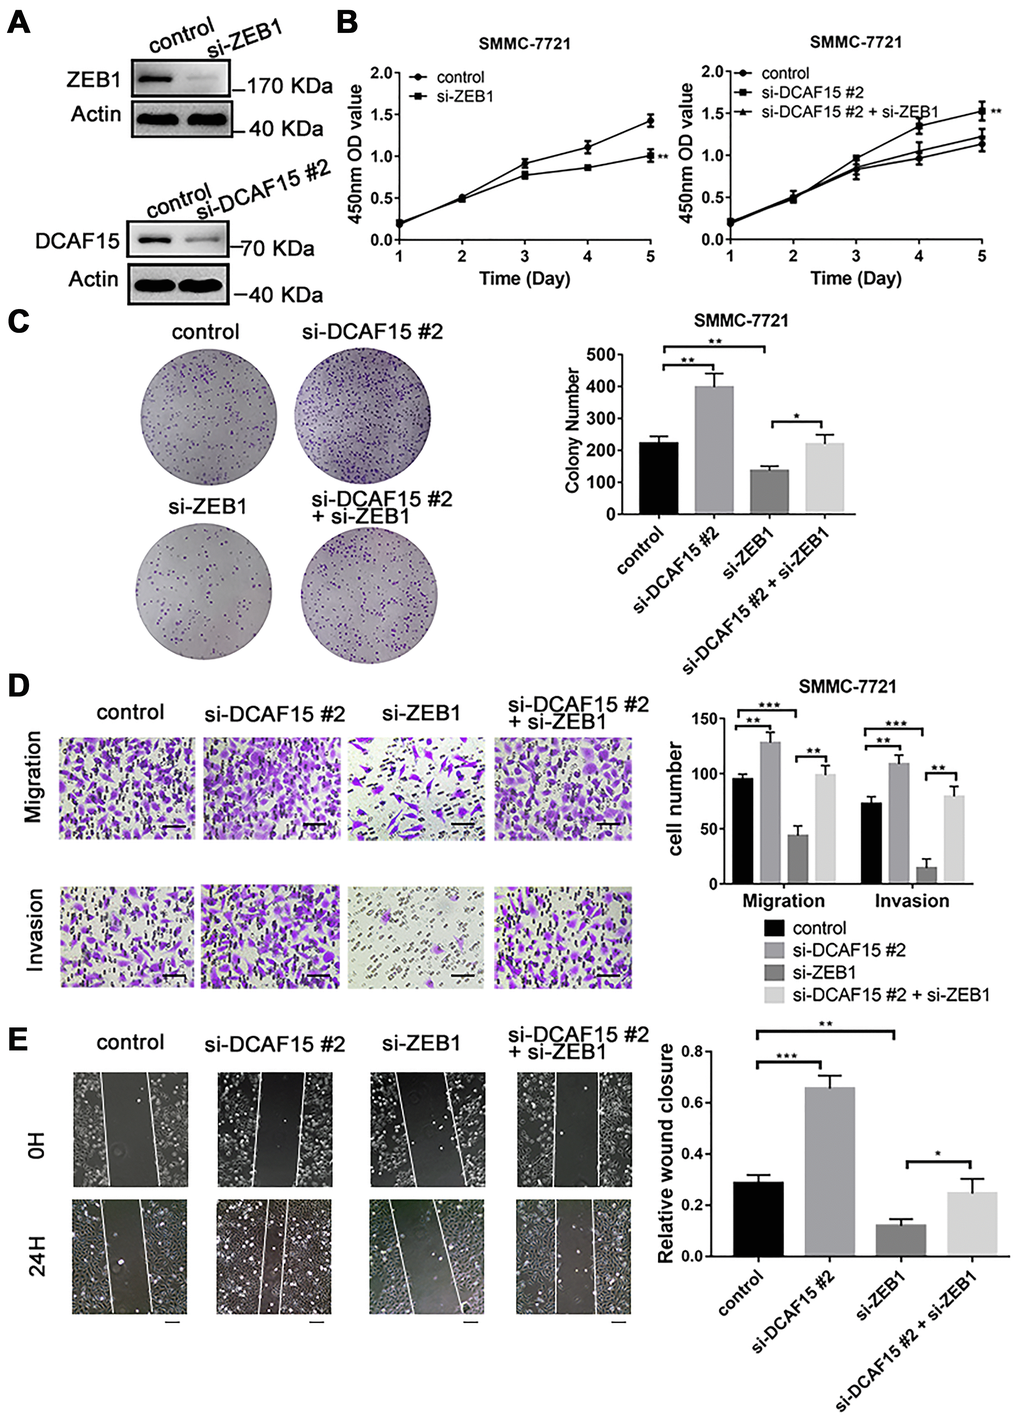 DCAF15 inhibits proliferation, migration, and invasion of HCC cells. (A) DCAF15 and ZEB1 was knocked down in SMMC-7721 cells by expressing siRNAs. Immunoblotting analyses were performed with the indicated antibodies. (B) CCK-8 assay was performed for cell proliferation of control, ZEB1-knockdown, DCAF15-knockdown and ZEB1-& DCAF15-knockdown SMMC-7721 cells. (C) The cells of (B) were plated and cultured on 6-well plates. Colony numbers were quantified. (D) The migration and invasion ability of the cells of (B) in were examined using the Transwell migration and invasion assay respectively. Cell numbers were quantified. Data are presented as mean ± SD (n = 3). **P ***P E) The cells of (B) were plated and cultured on 6-well plates. The cell layer was scratched with a 10 μl pipette tip. For each sample, at least three scratched fields were photographed immediately (0 h) or 24 h after scratching. Photographs of representative images were taken at ×100 magnification.